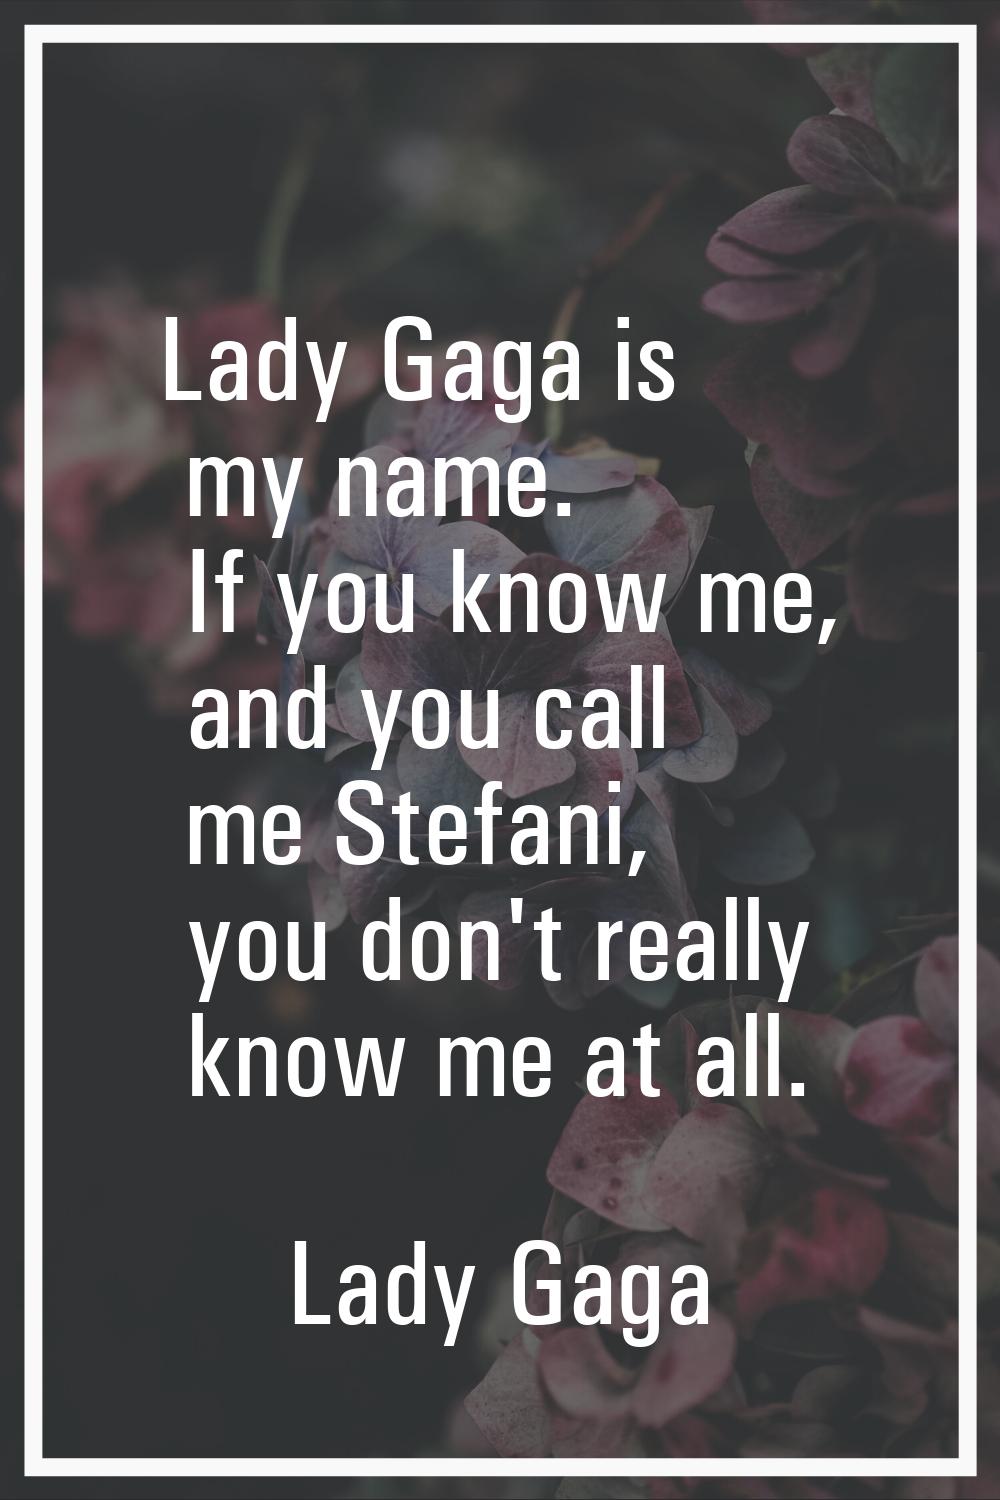 Lady Gaga is my name. If you know me, and you call me Stefani, you don't really know me at all.